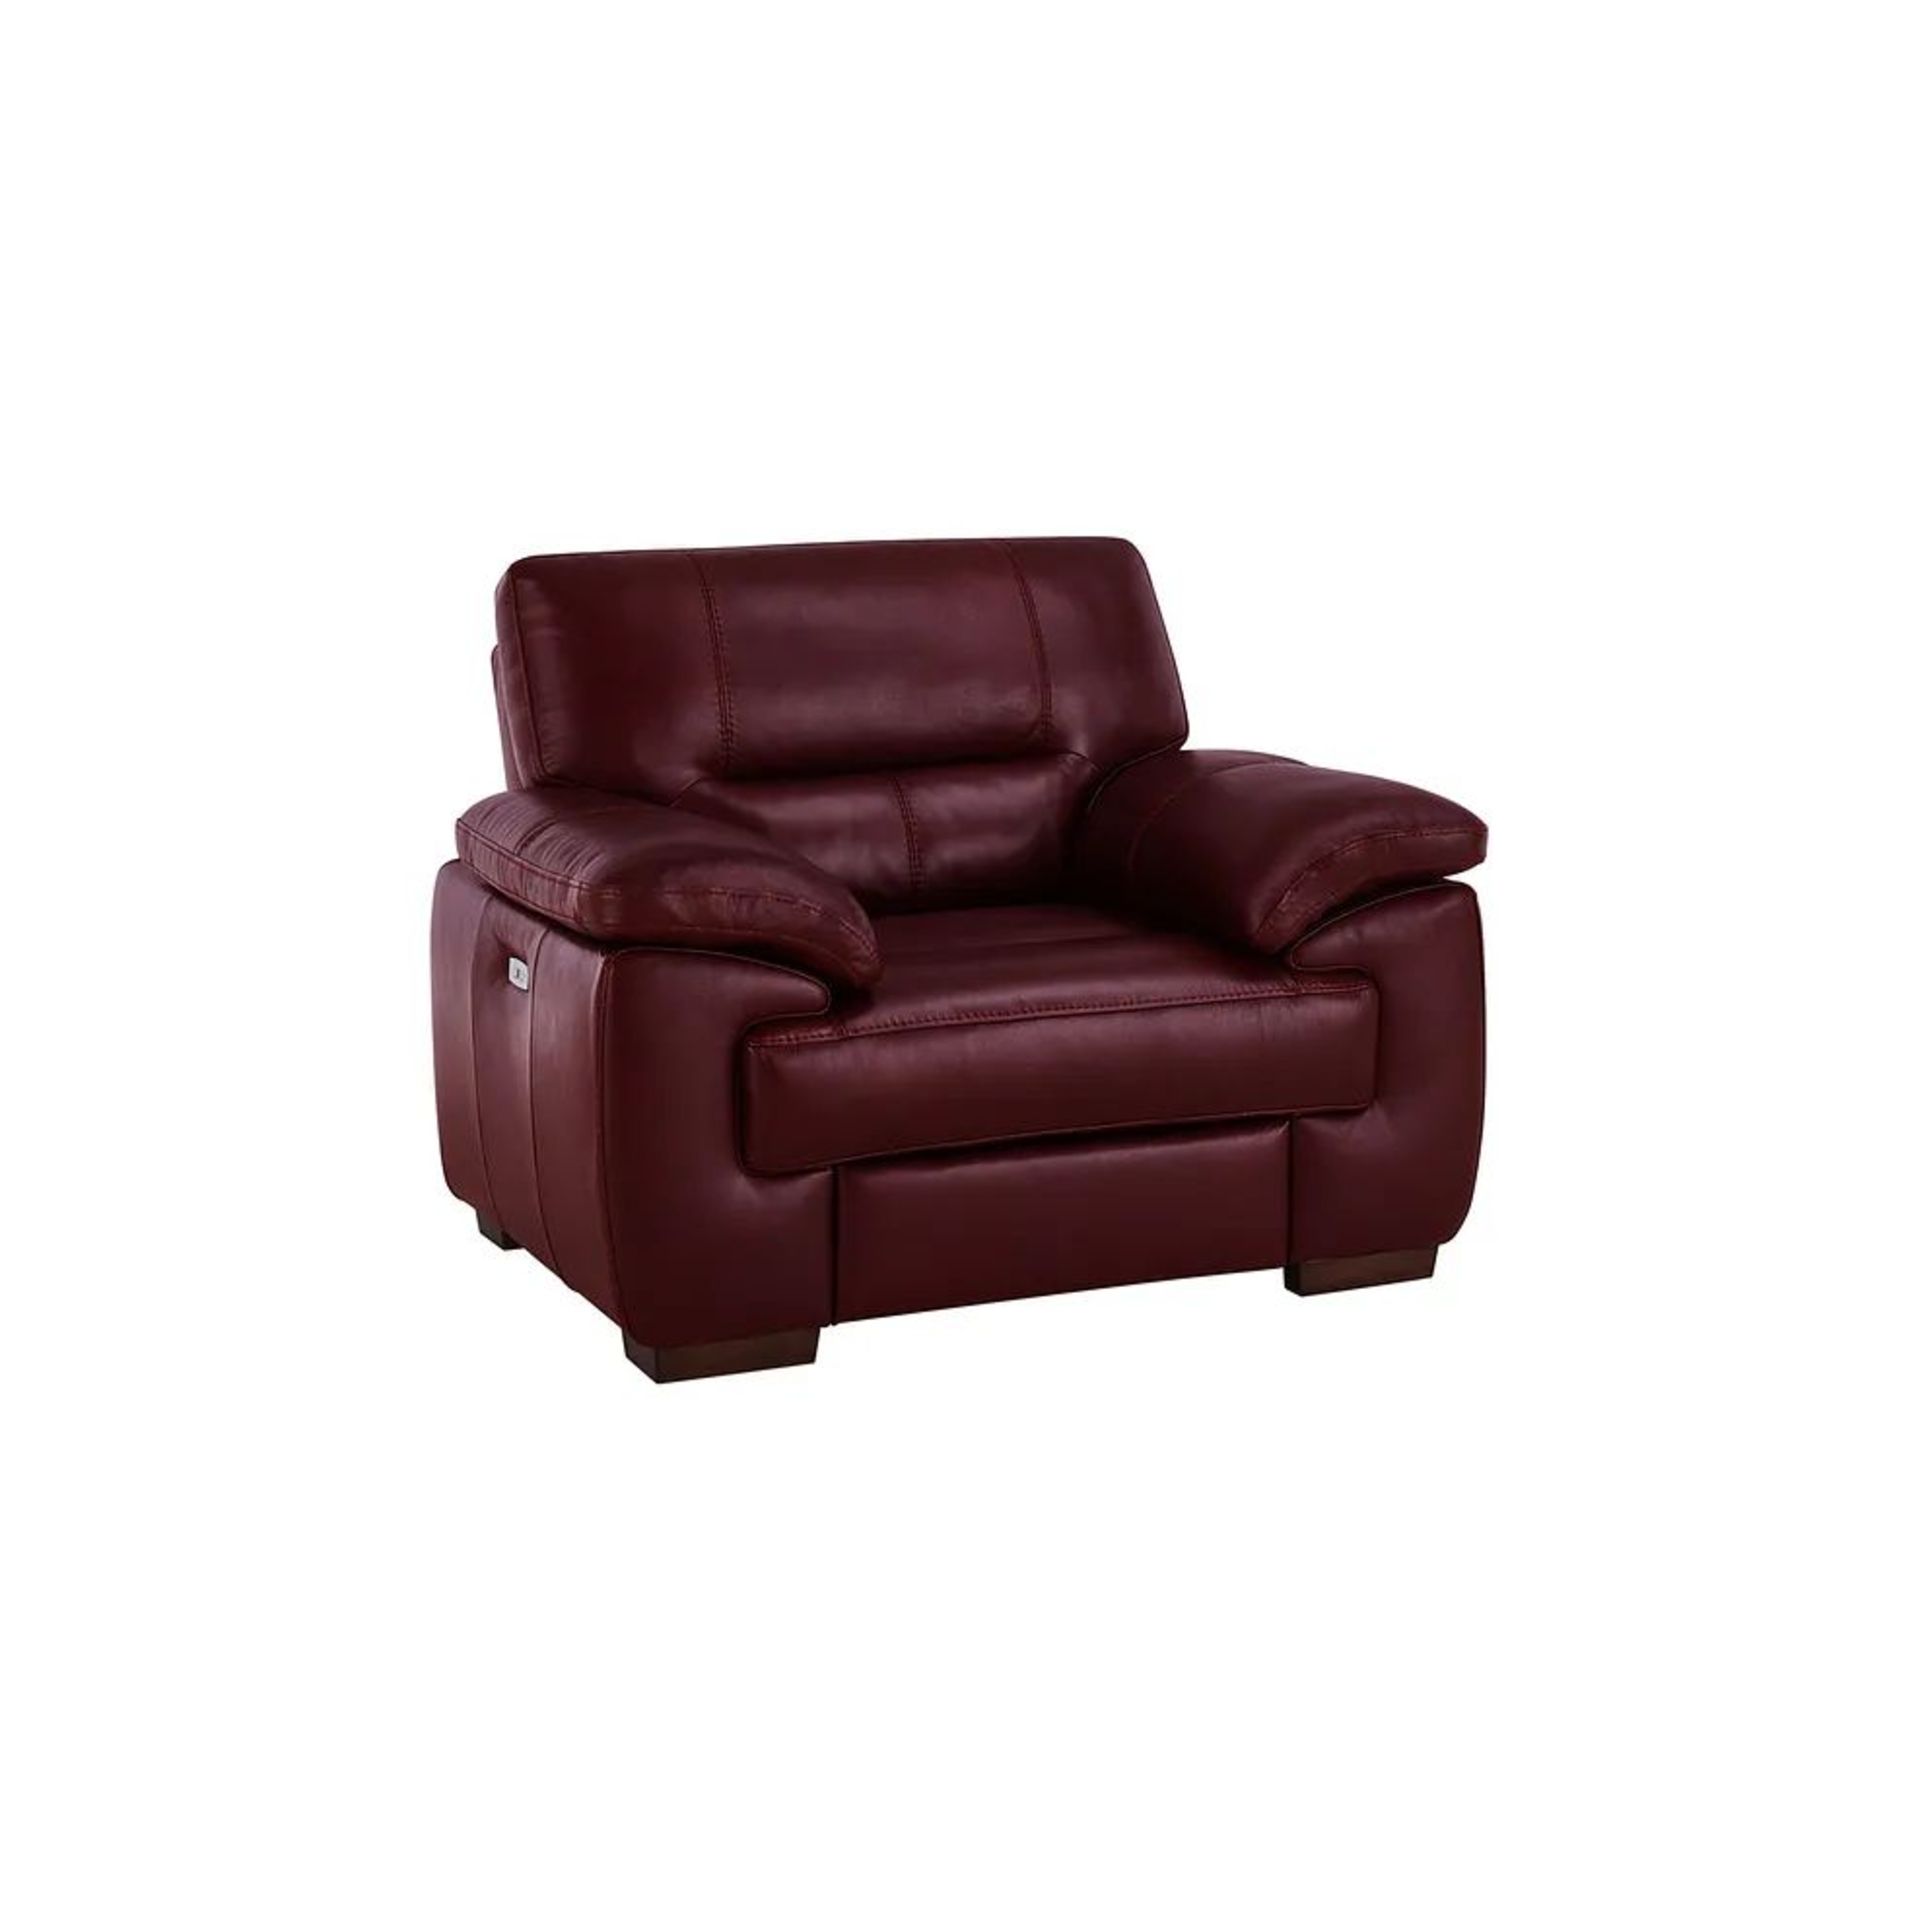 BRAND NEW ARLINGTON Electric Recliner Armchair - BURGANDY LEATHER. RRP £1199. Create a traditional